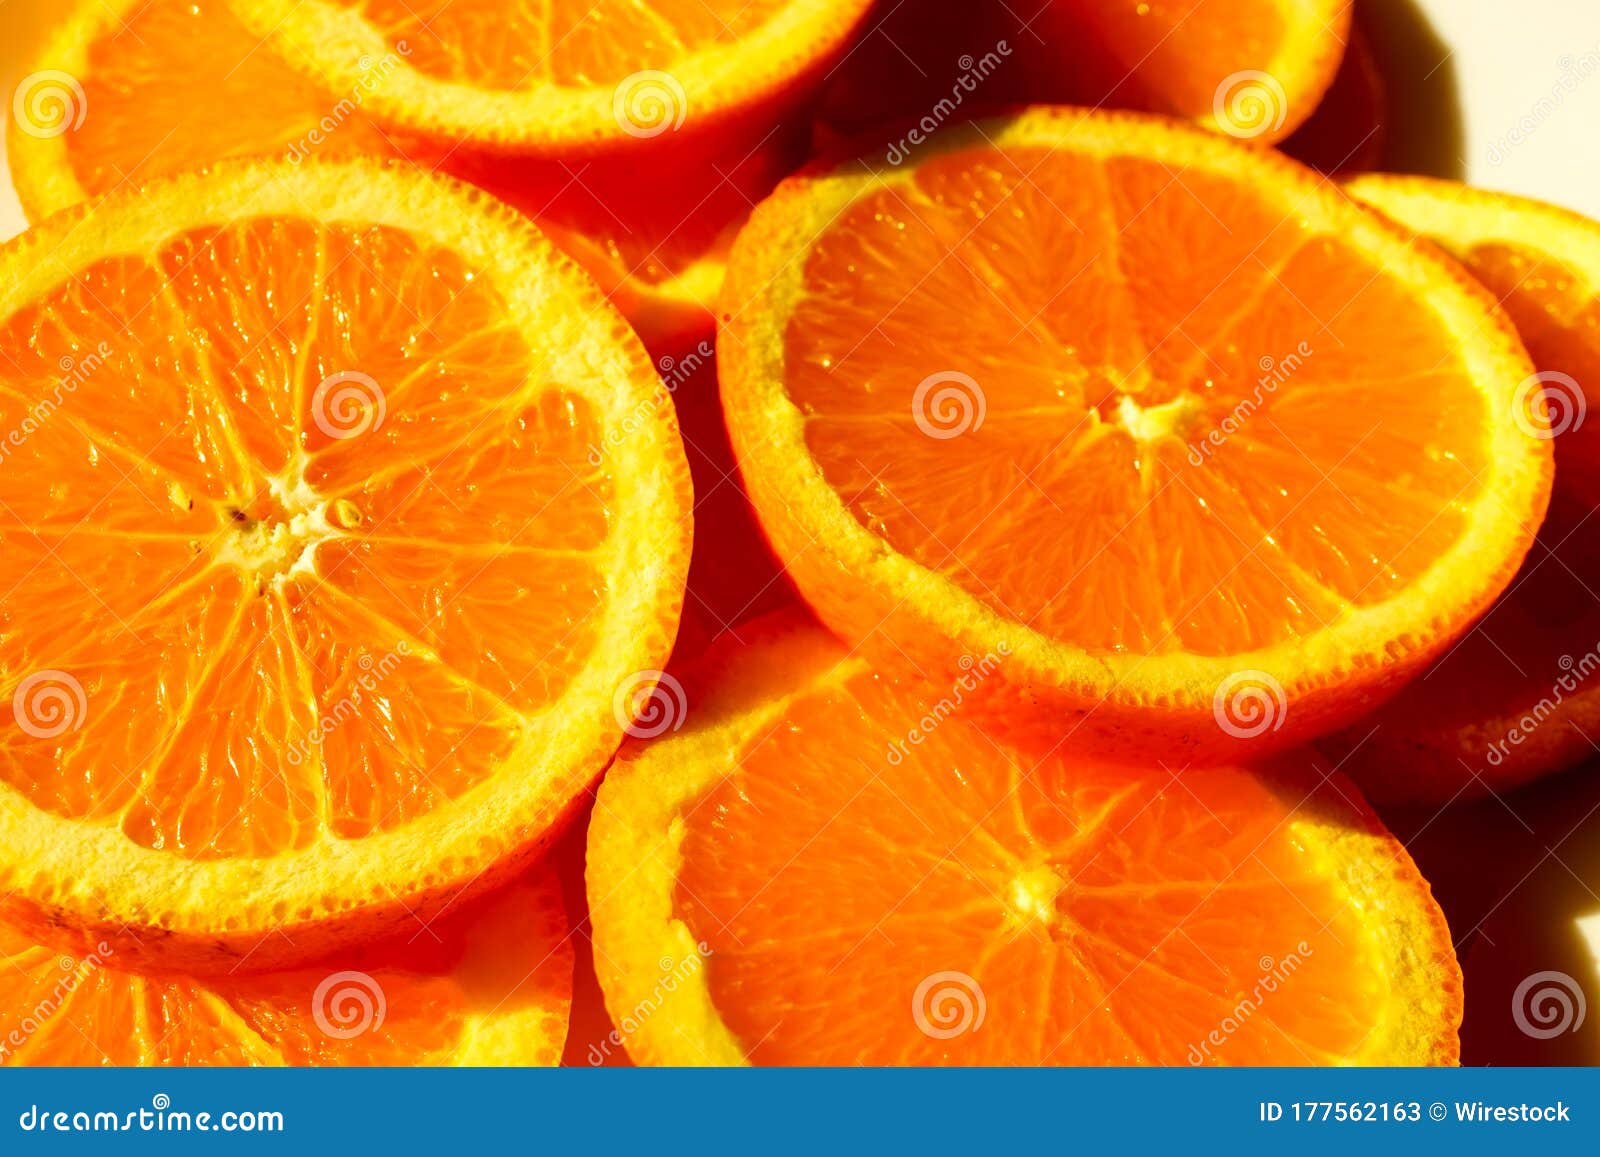 oranges on a plate on a sunny day